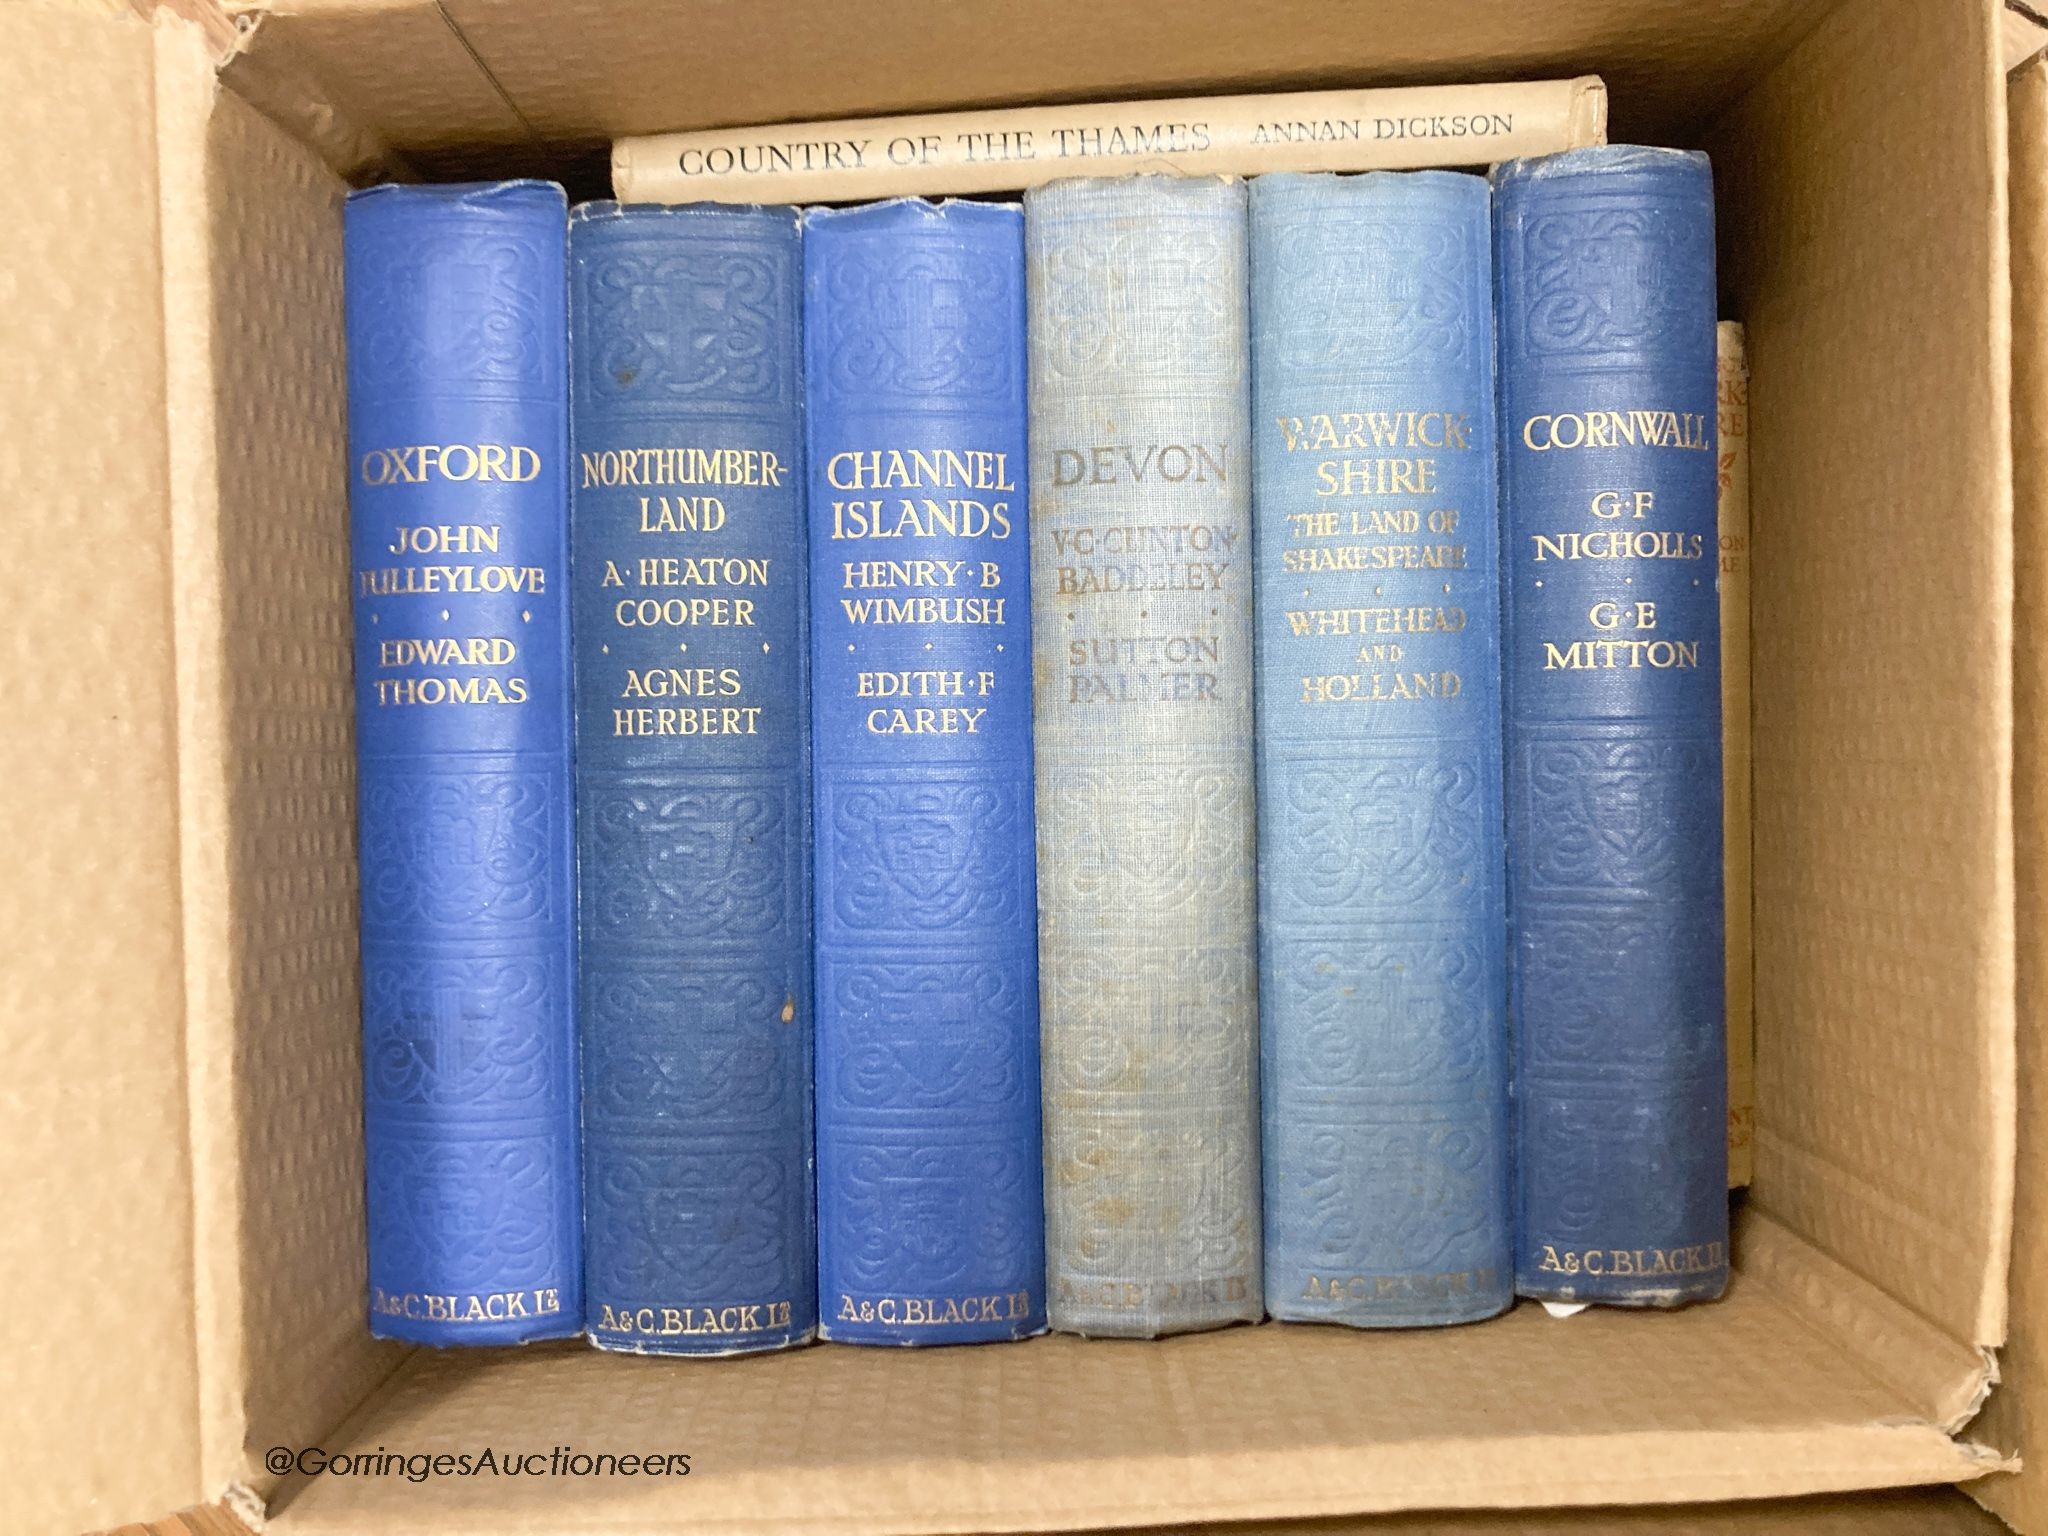 A large collection of cloth-bound and other topographical books on British counties and cities, mainly published by A. & C. Black